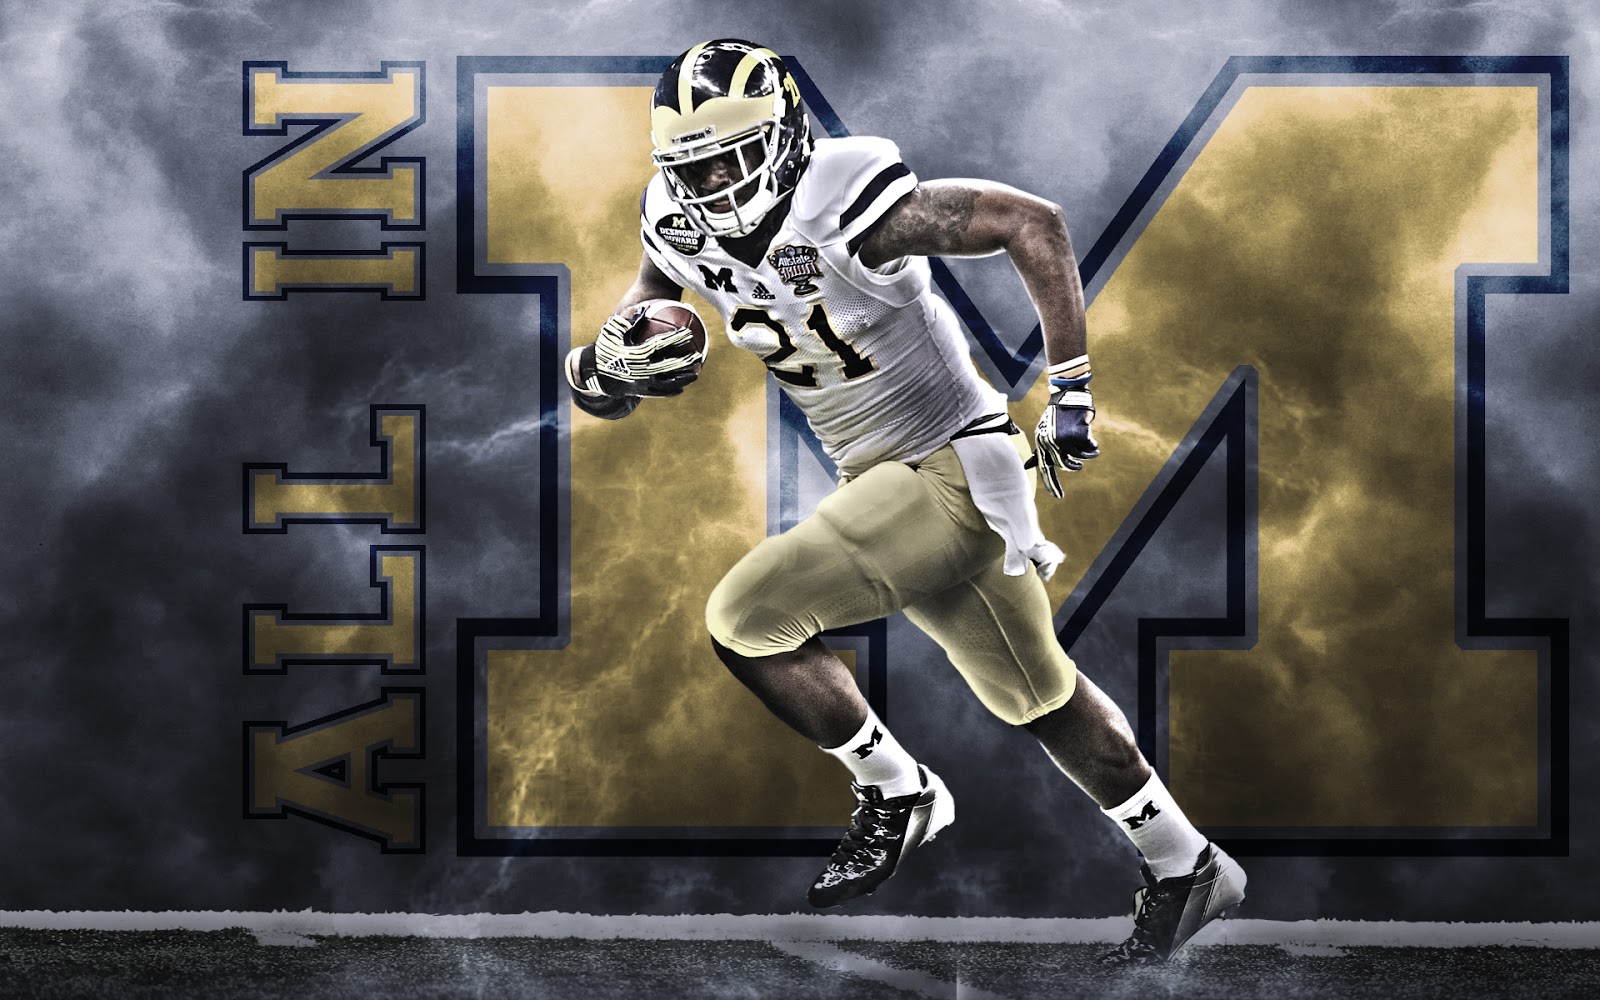 Go here to view all the Michigan wallpapers